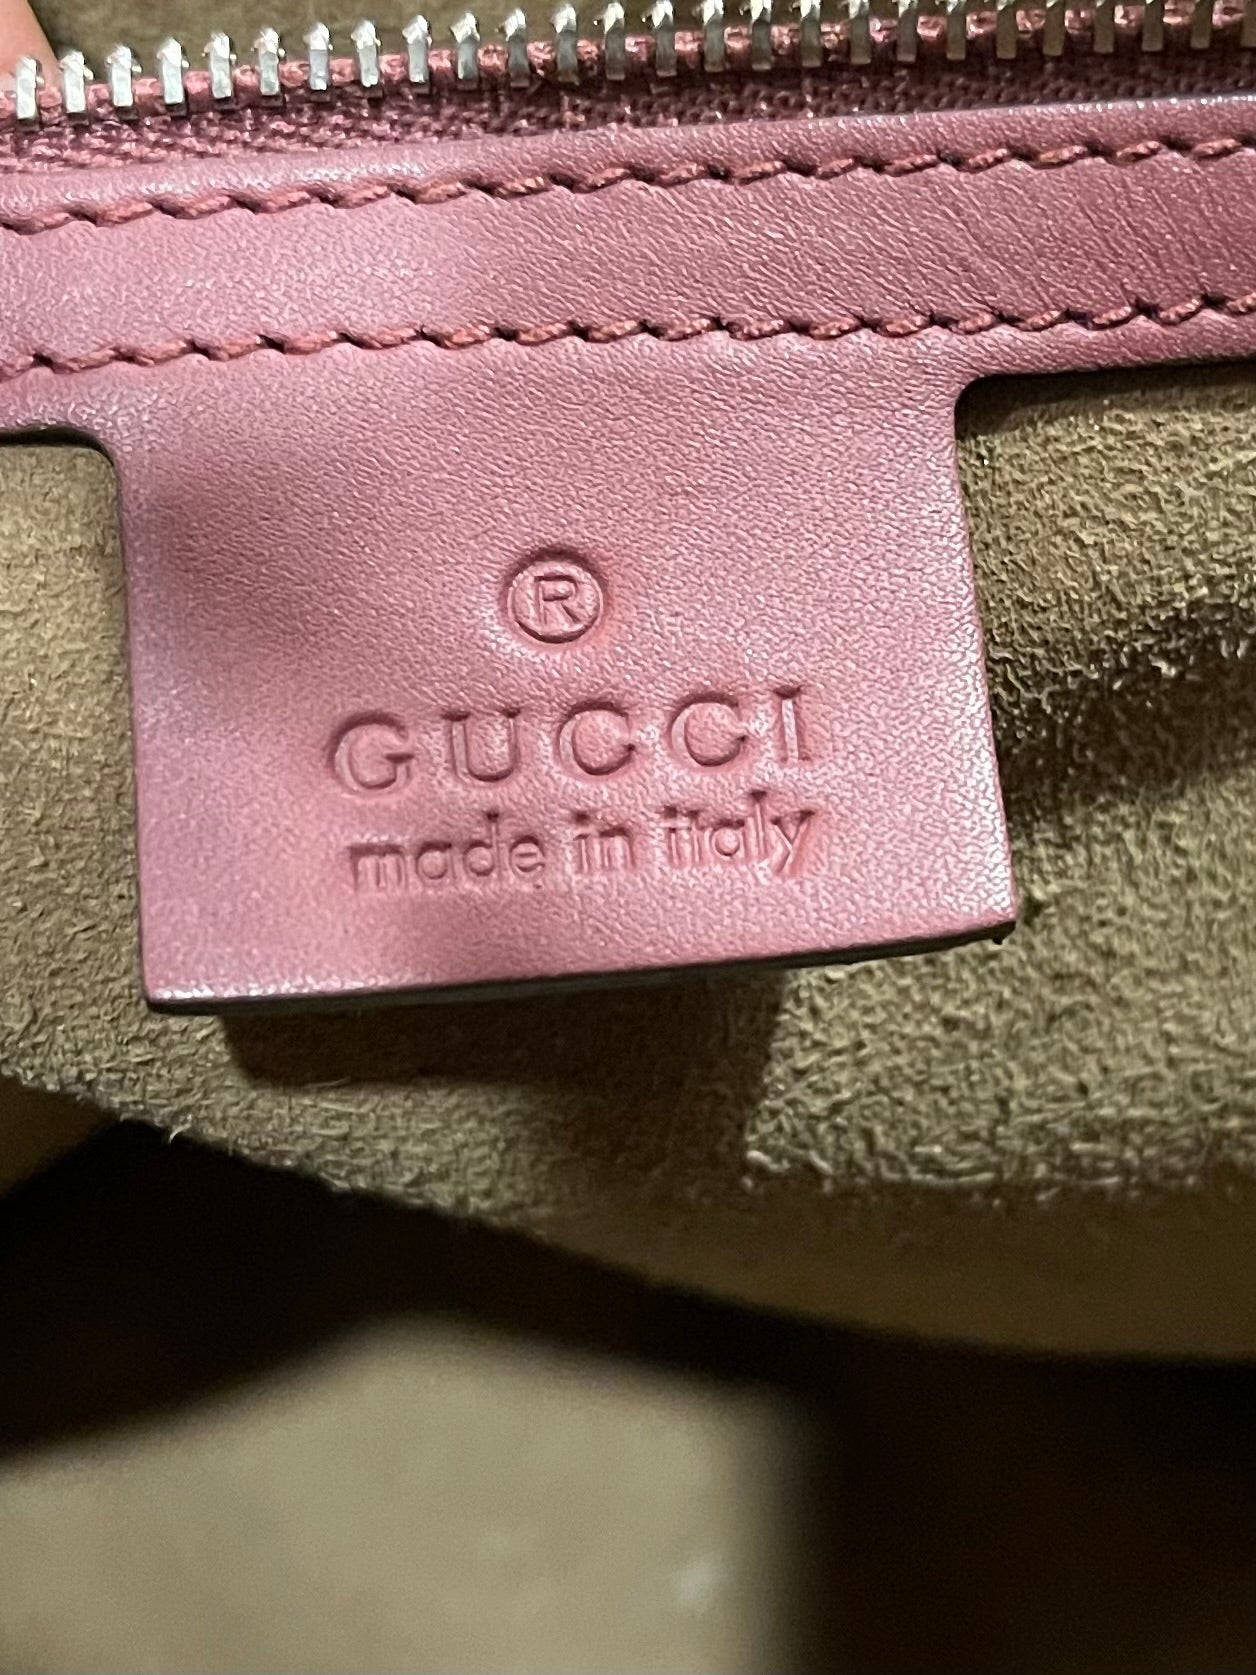 Gucci Beige/Pink/Red GG Coated Canvas Supreme Top Handle Small